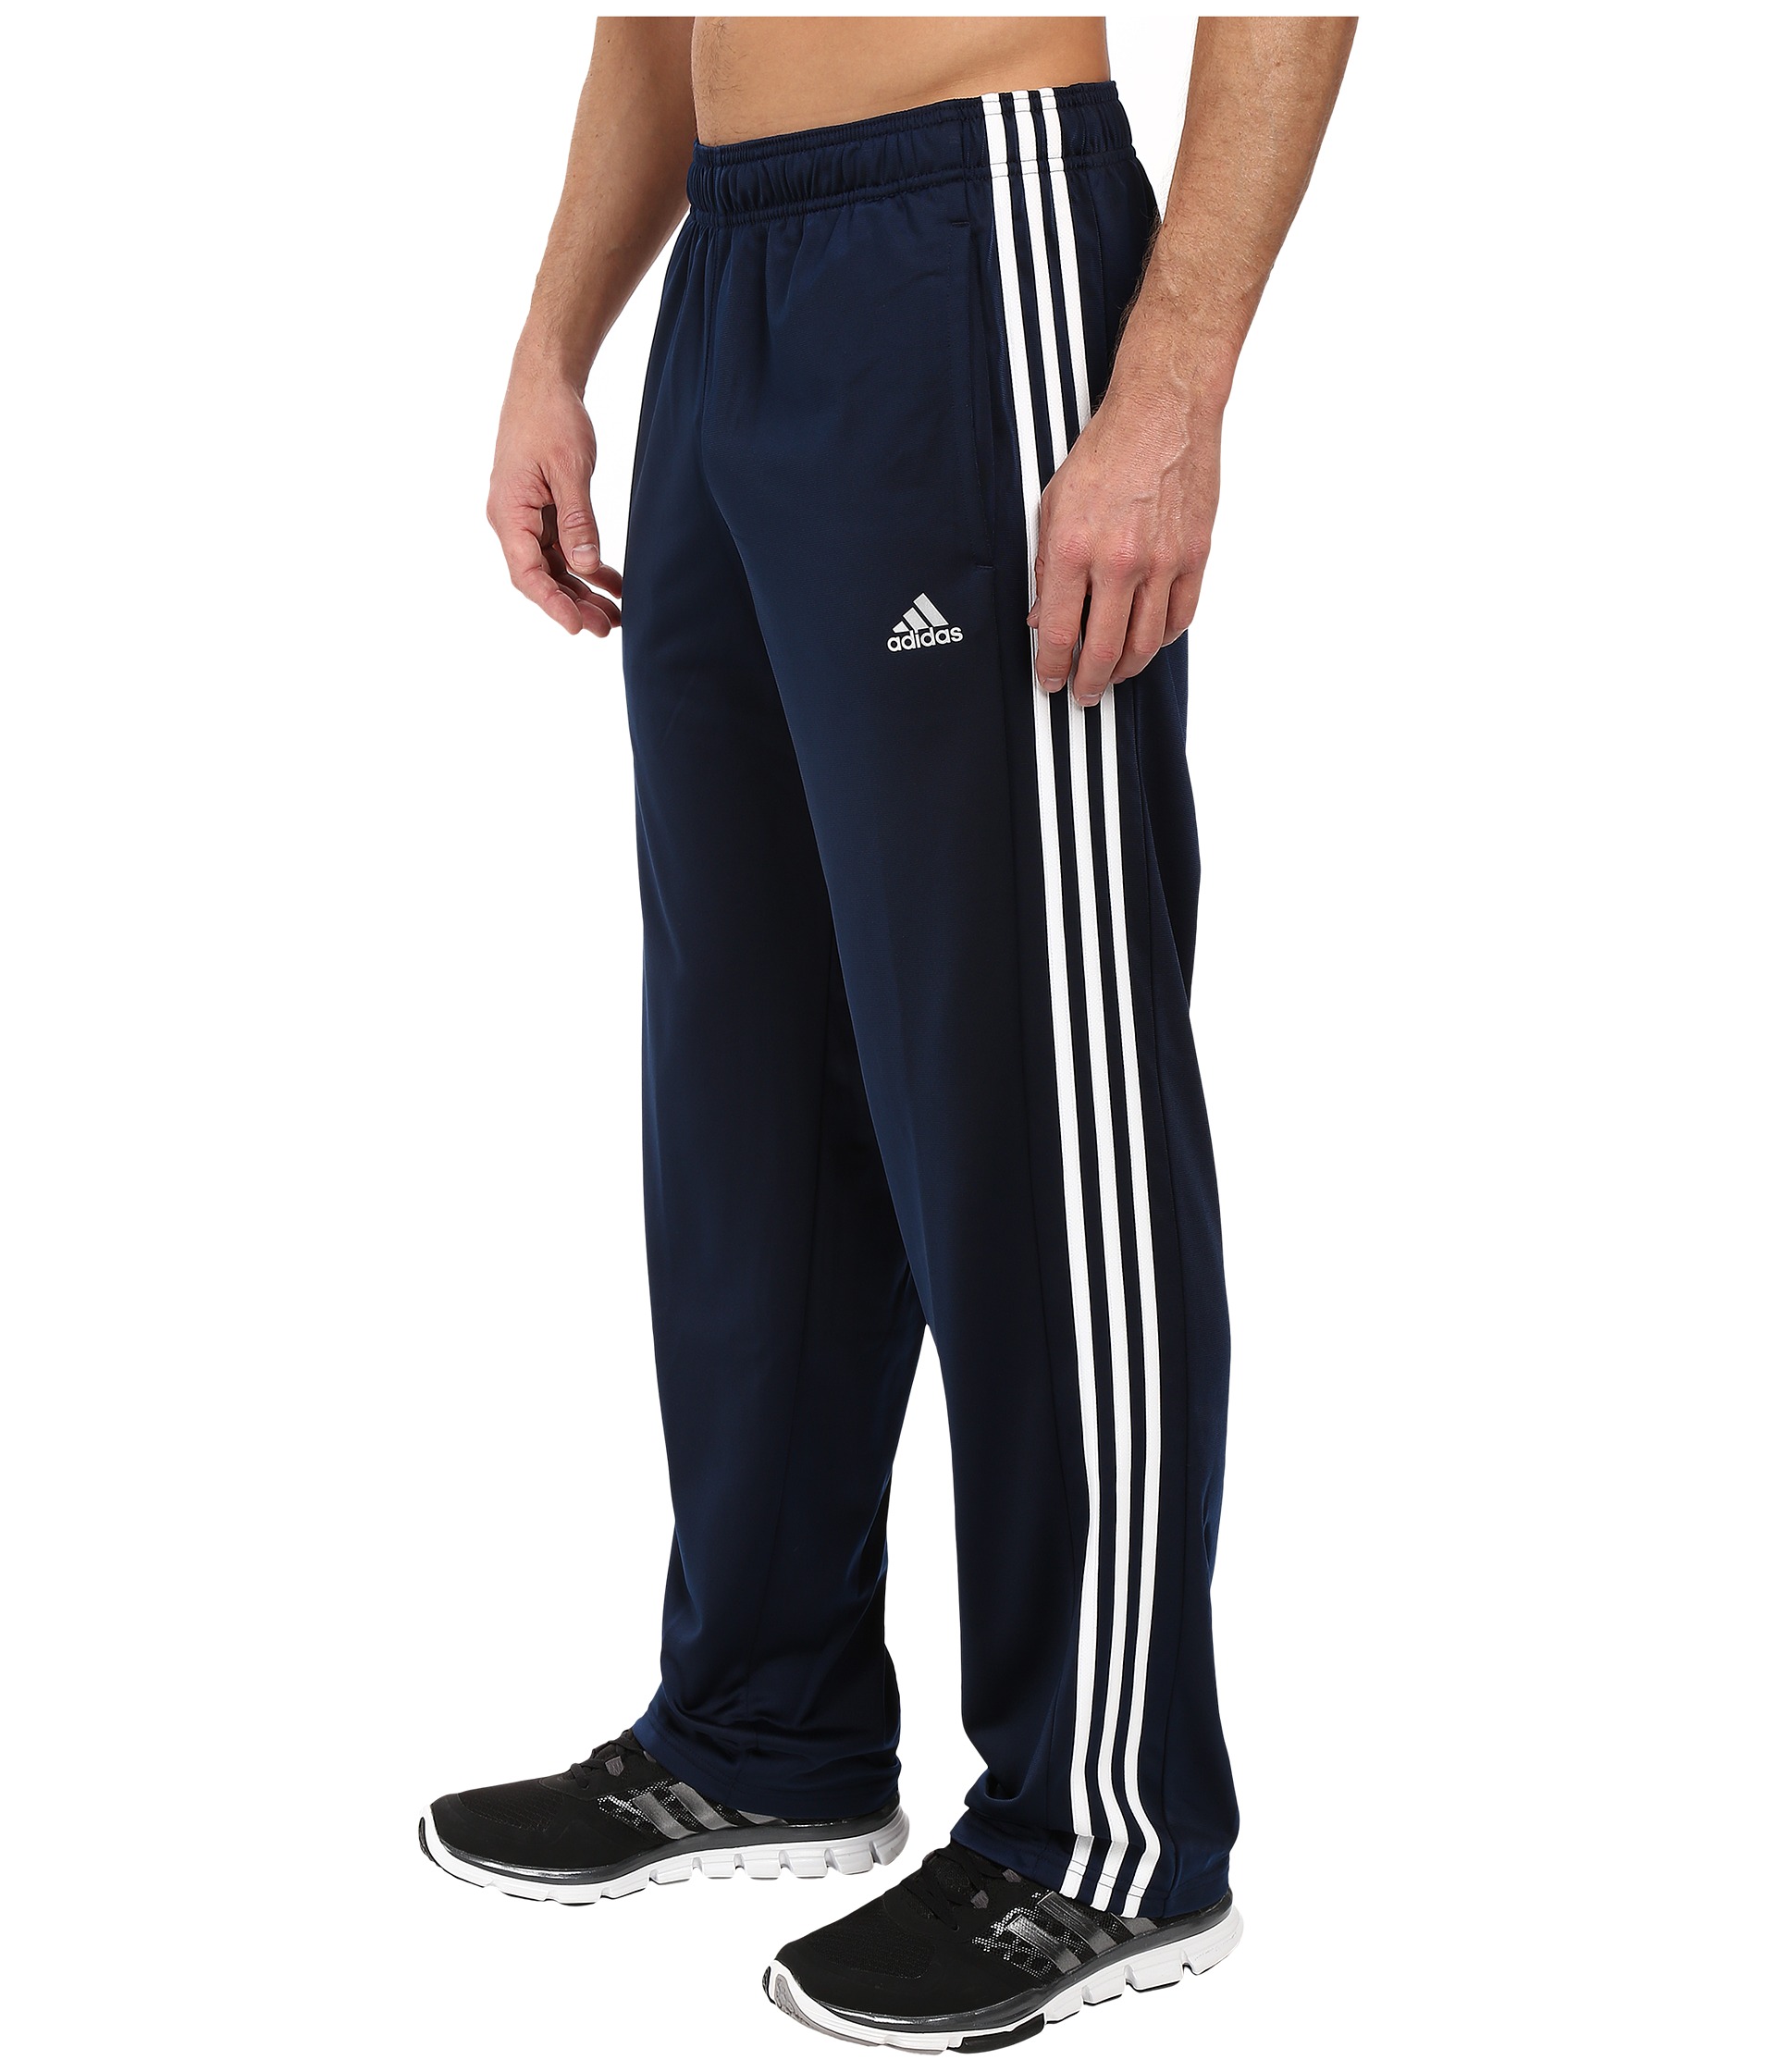 adidas Essential Tricot Track Pants at Zappos.com